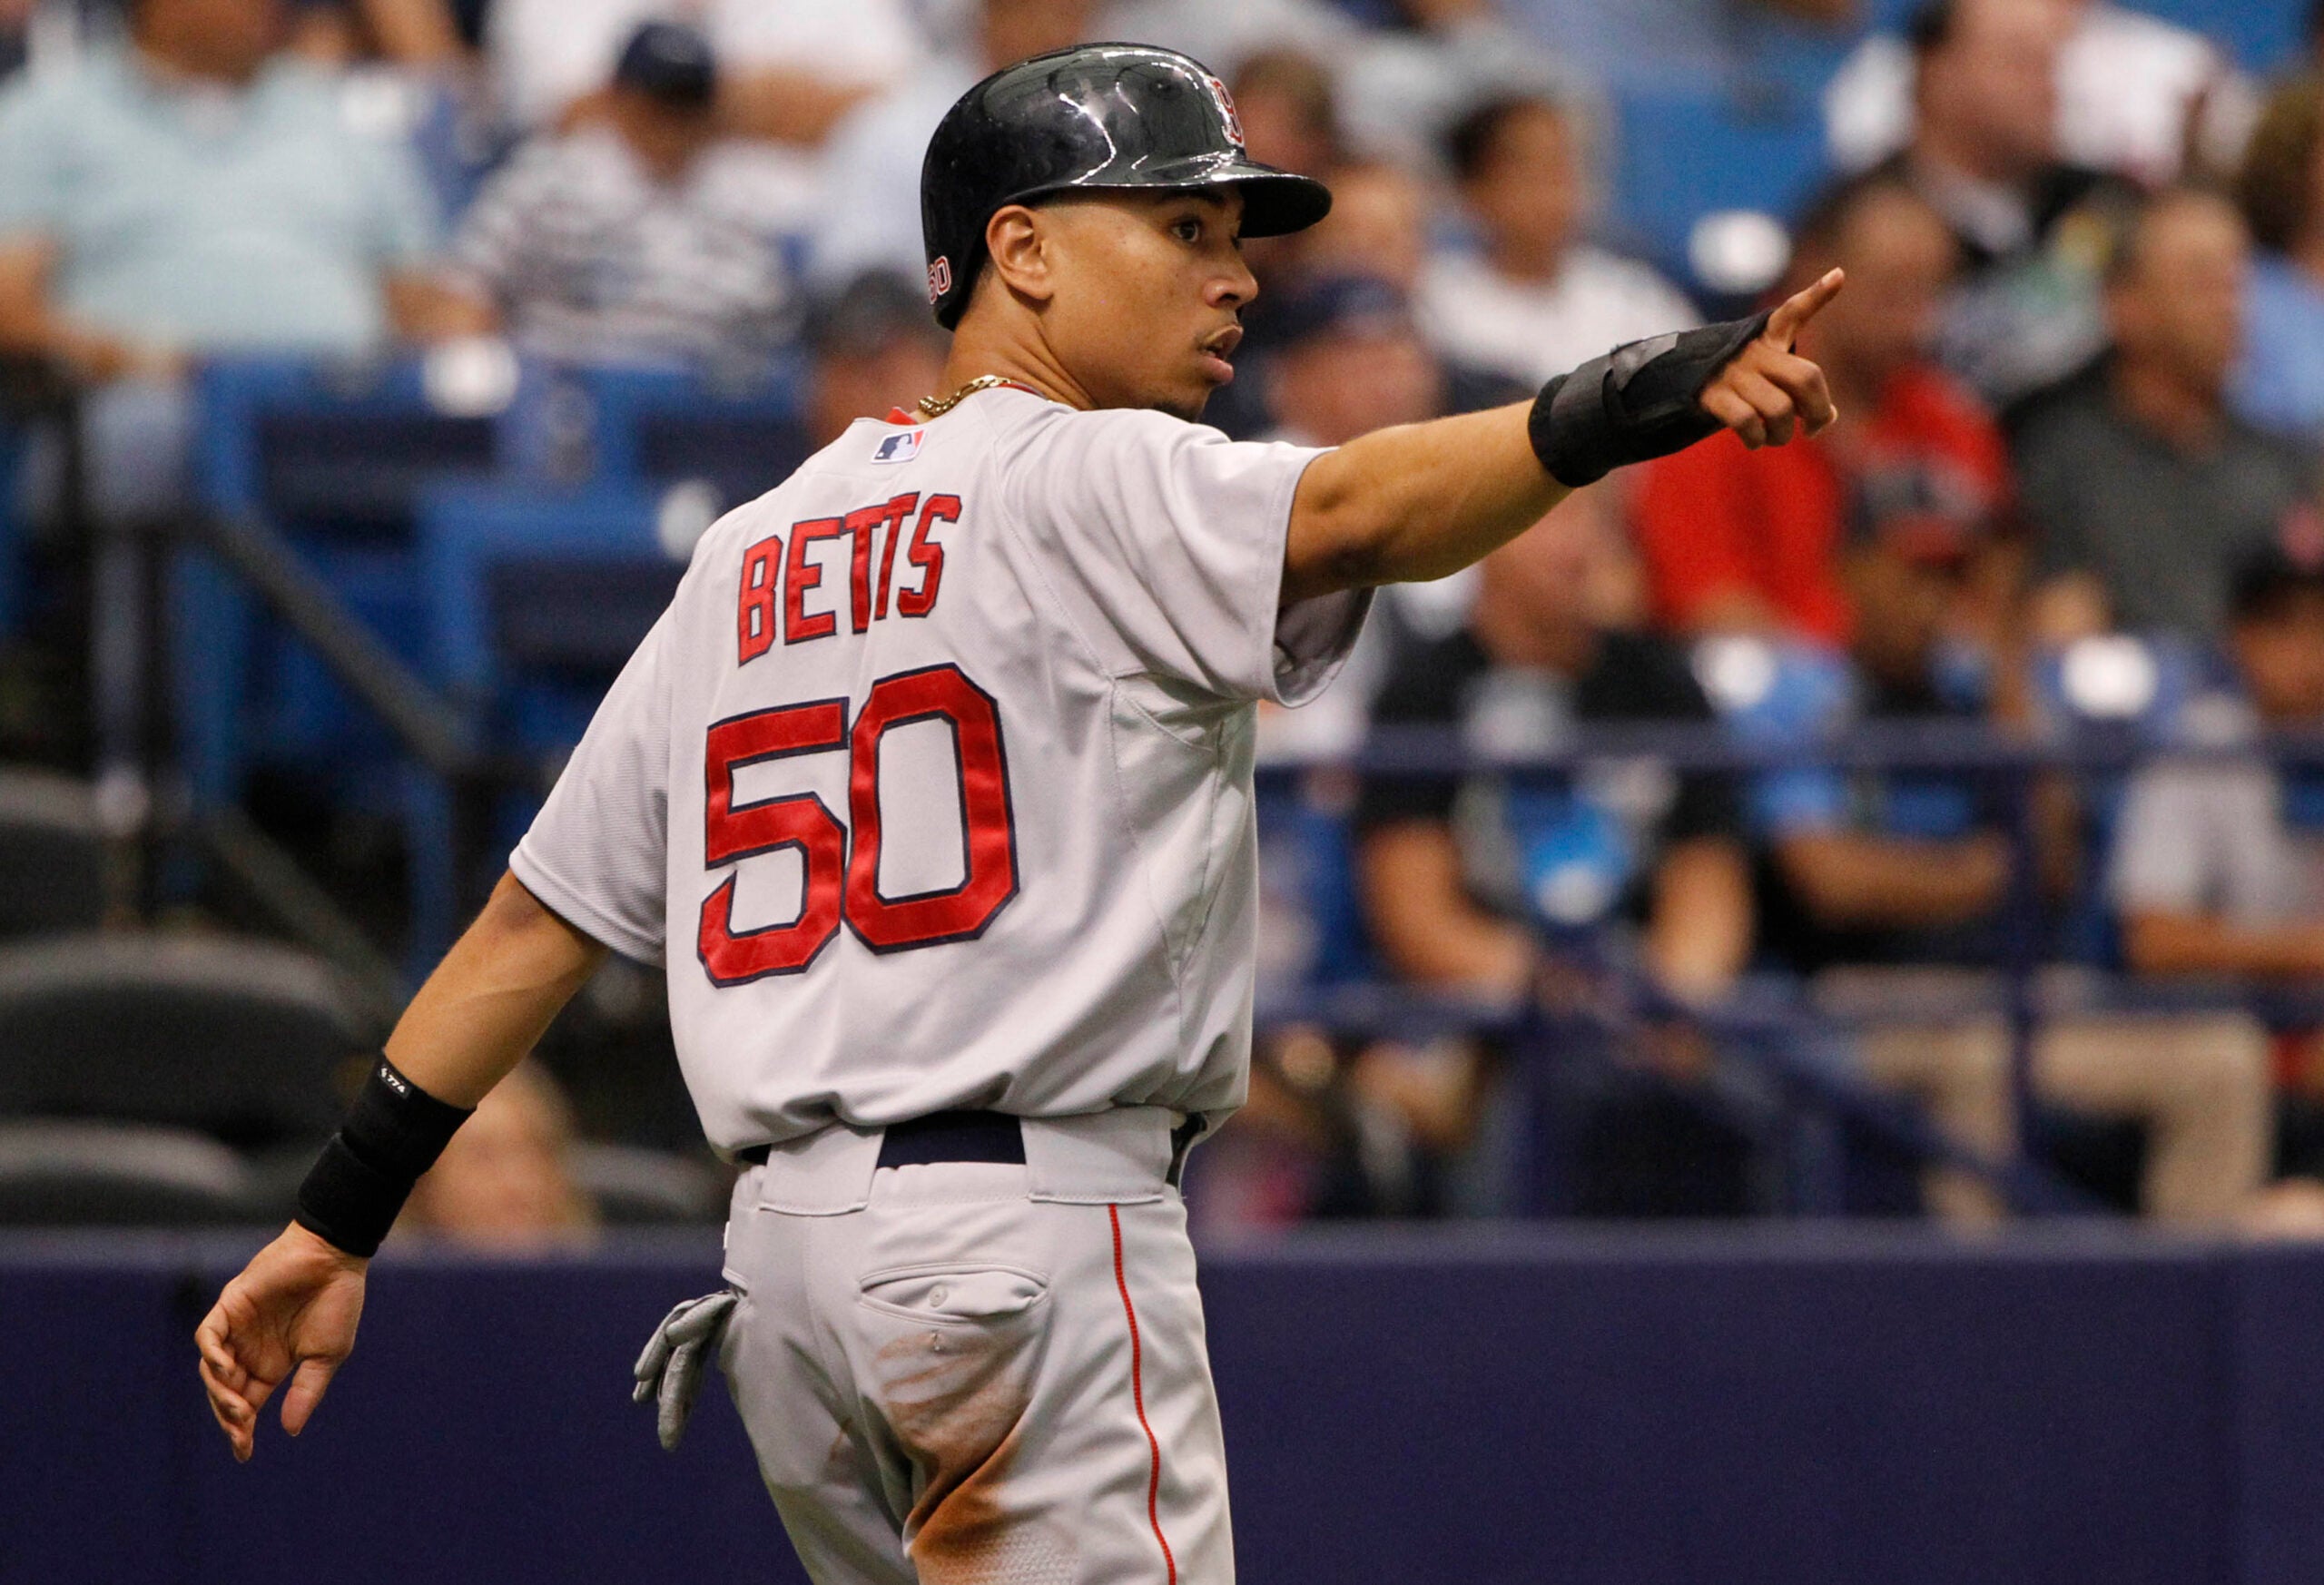 Mookie Betts' mother started his baseball journey